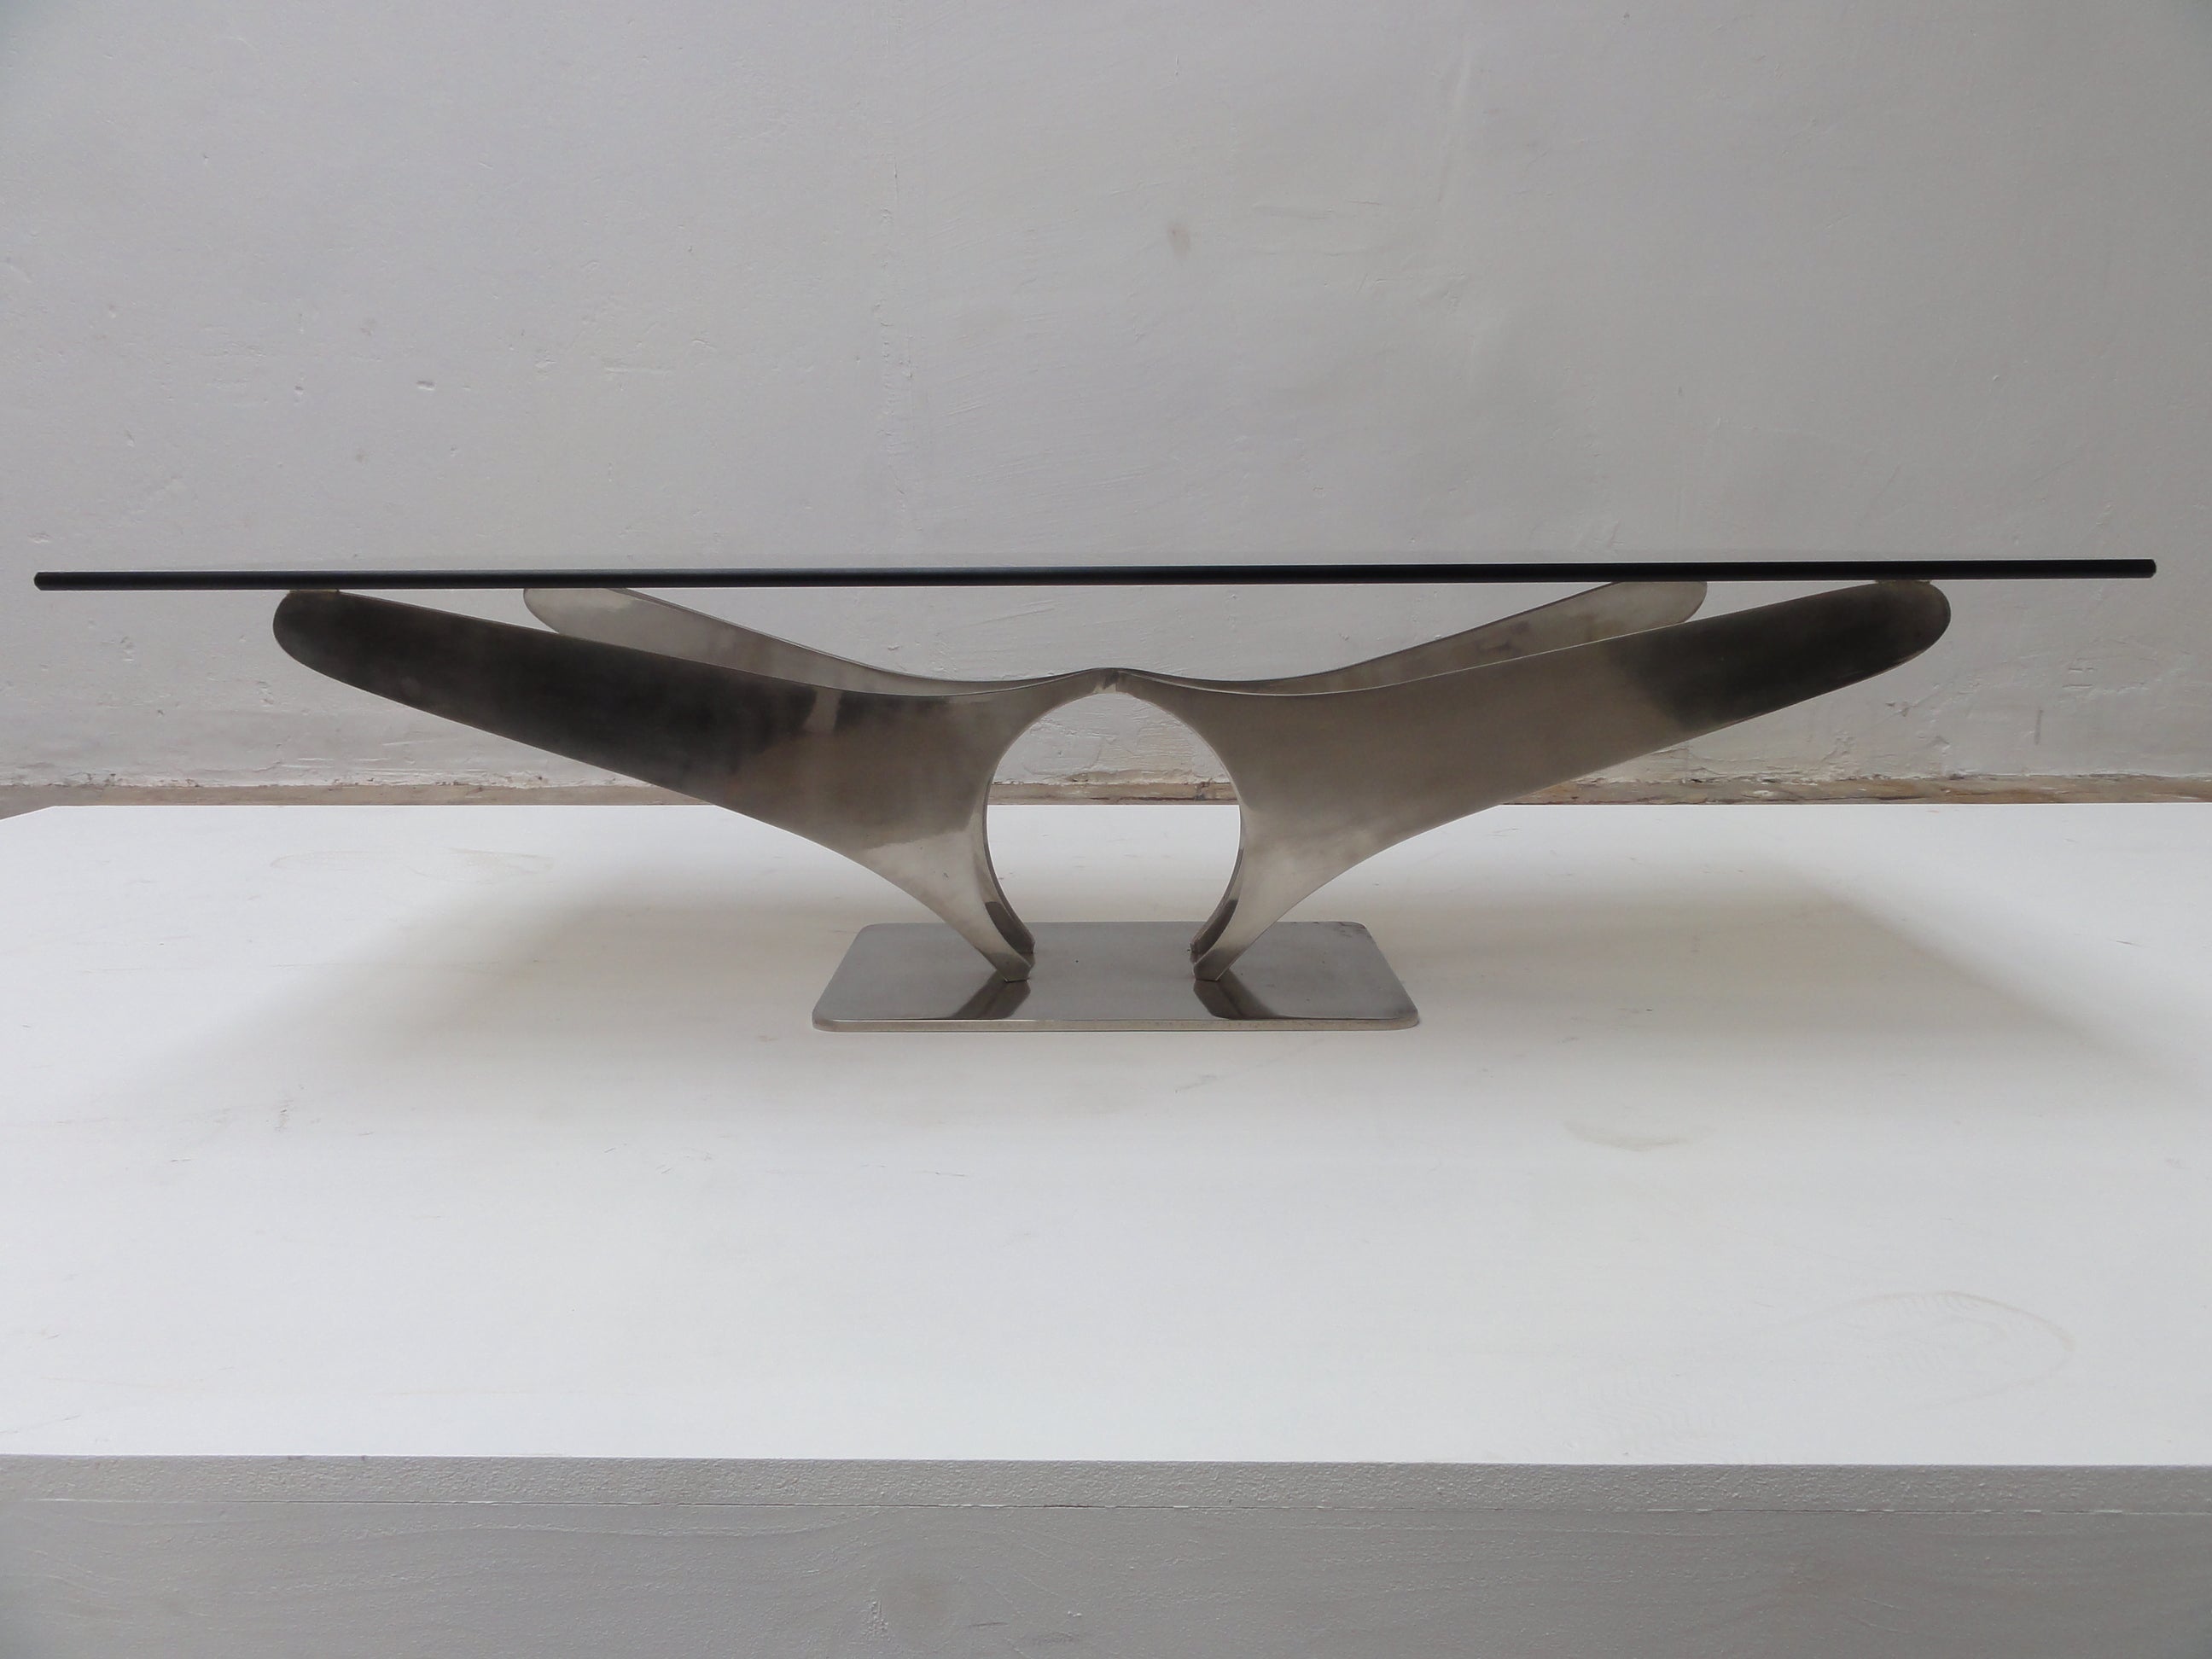 Stunning French 1968-72 sculptural Coffee Table In 5/16" (8 mm)  Stainless Steel